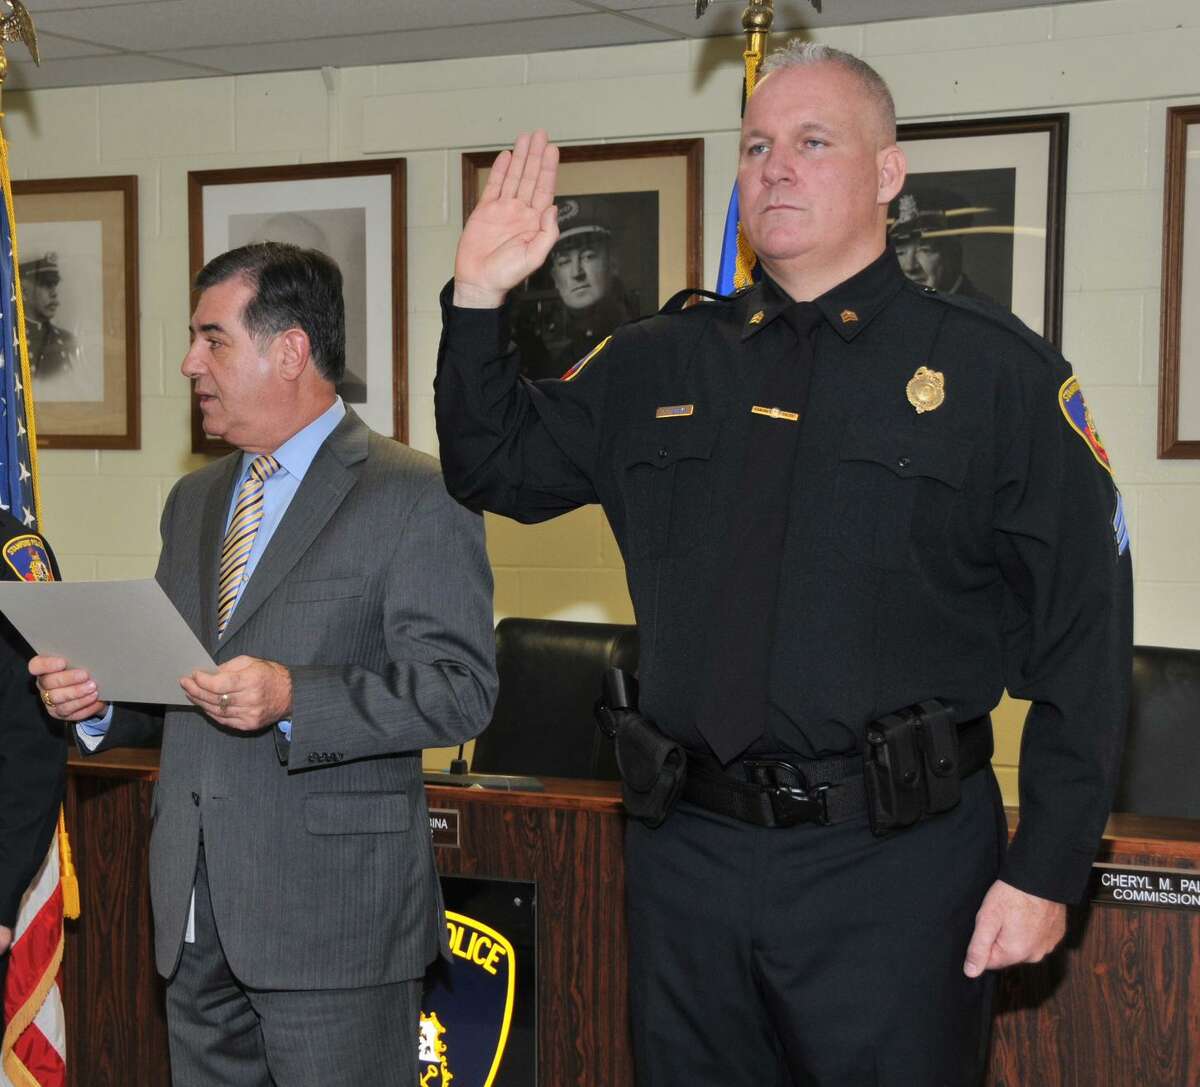 Christopher Broems is sworn in as a sergeant by then Mayor Michael Pavia at the Stamford Police Department in 2012.